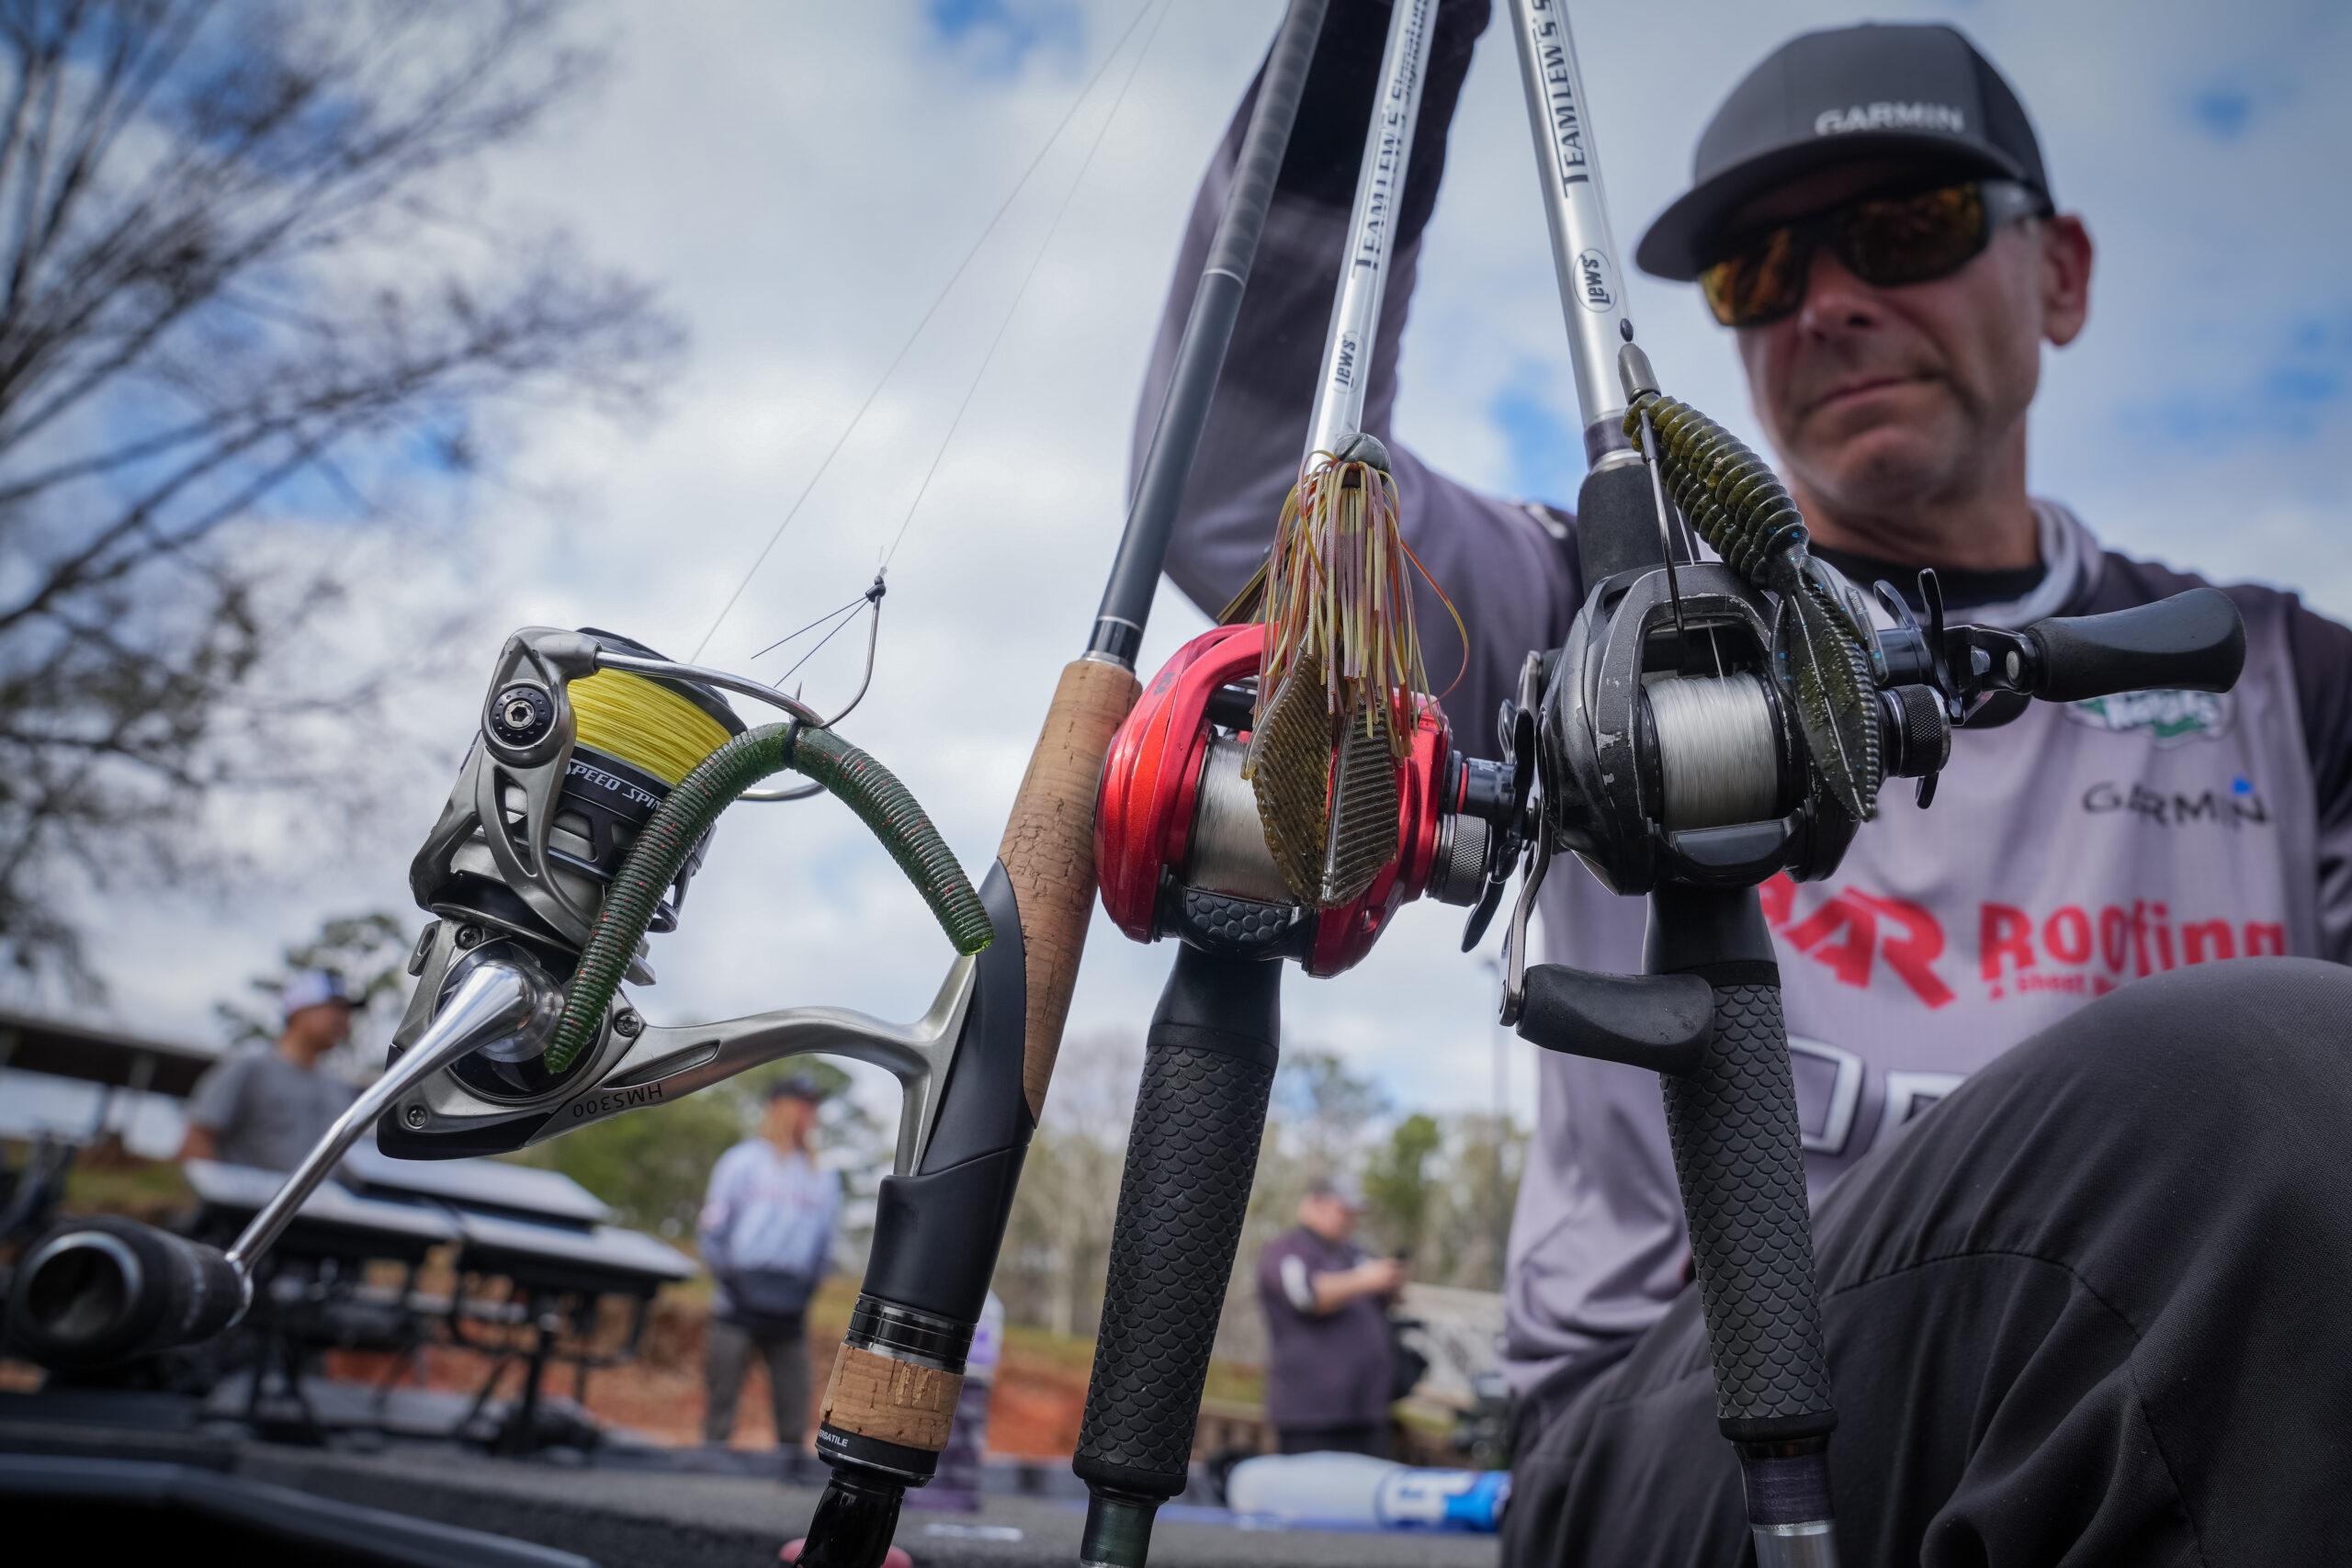 Top 10 baits from West Point Lake - Major League Fishing